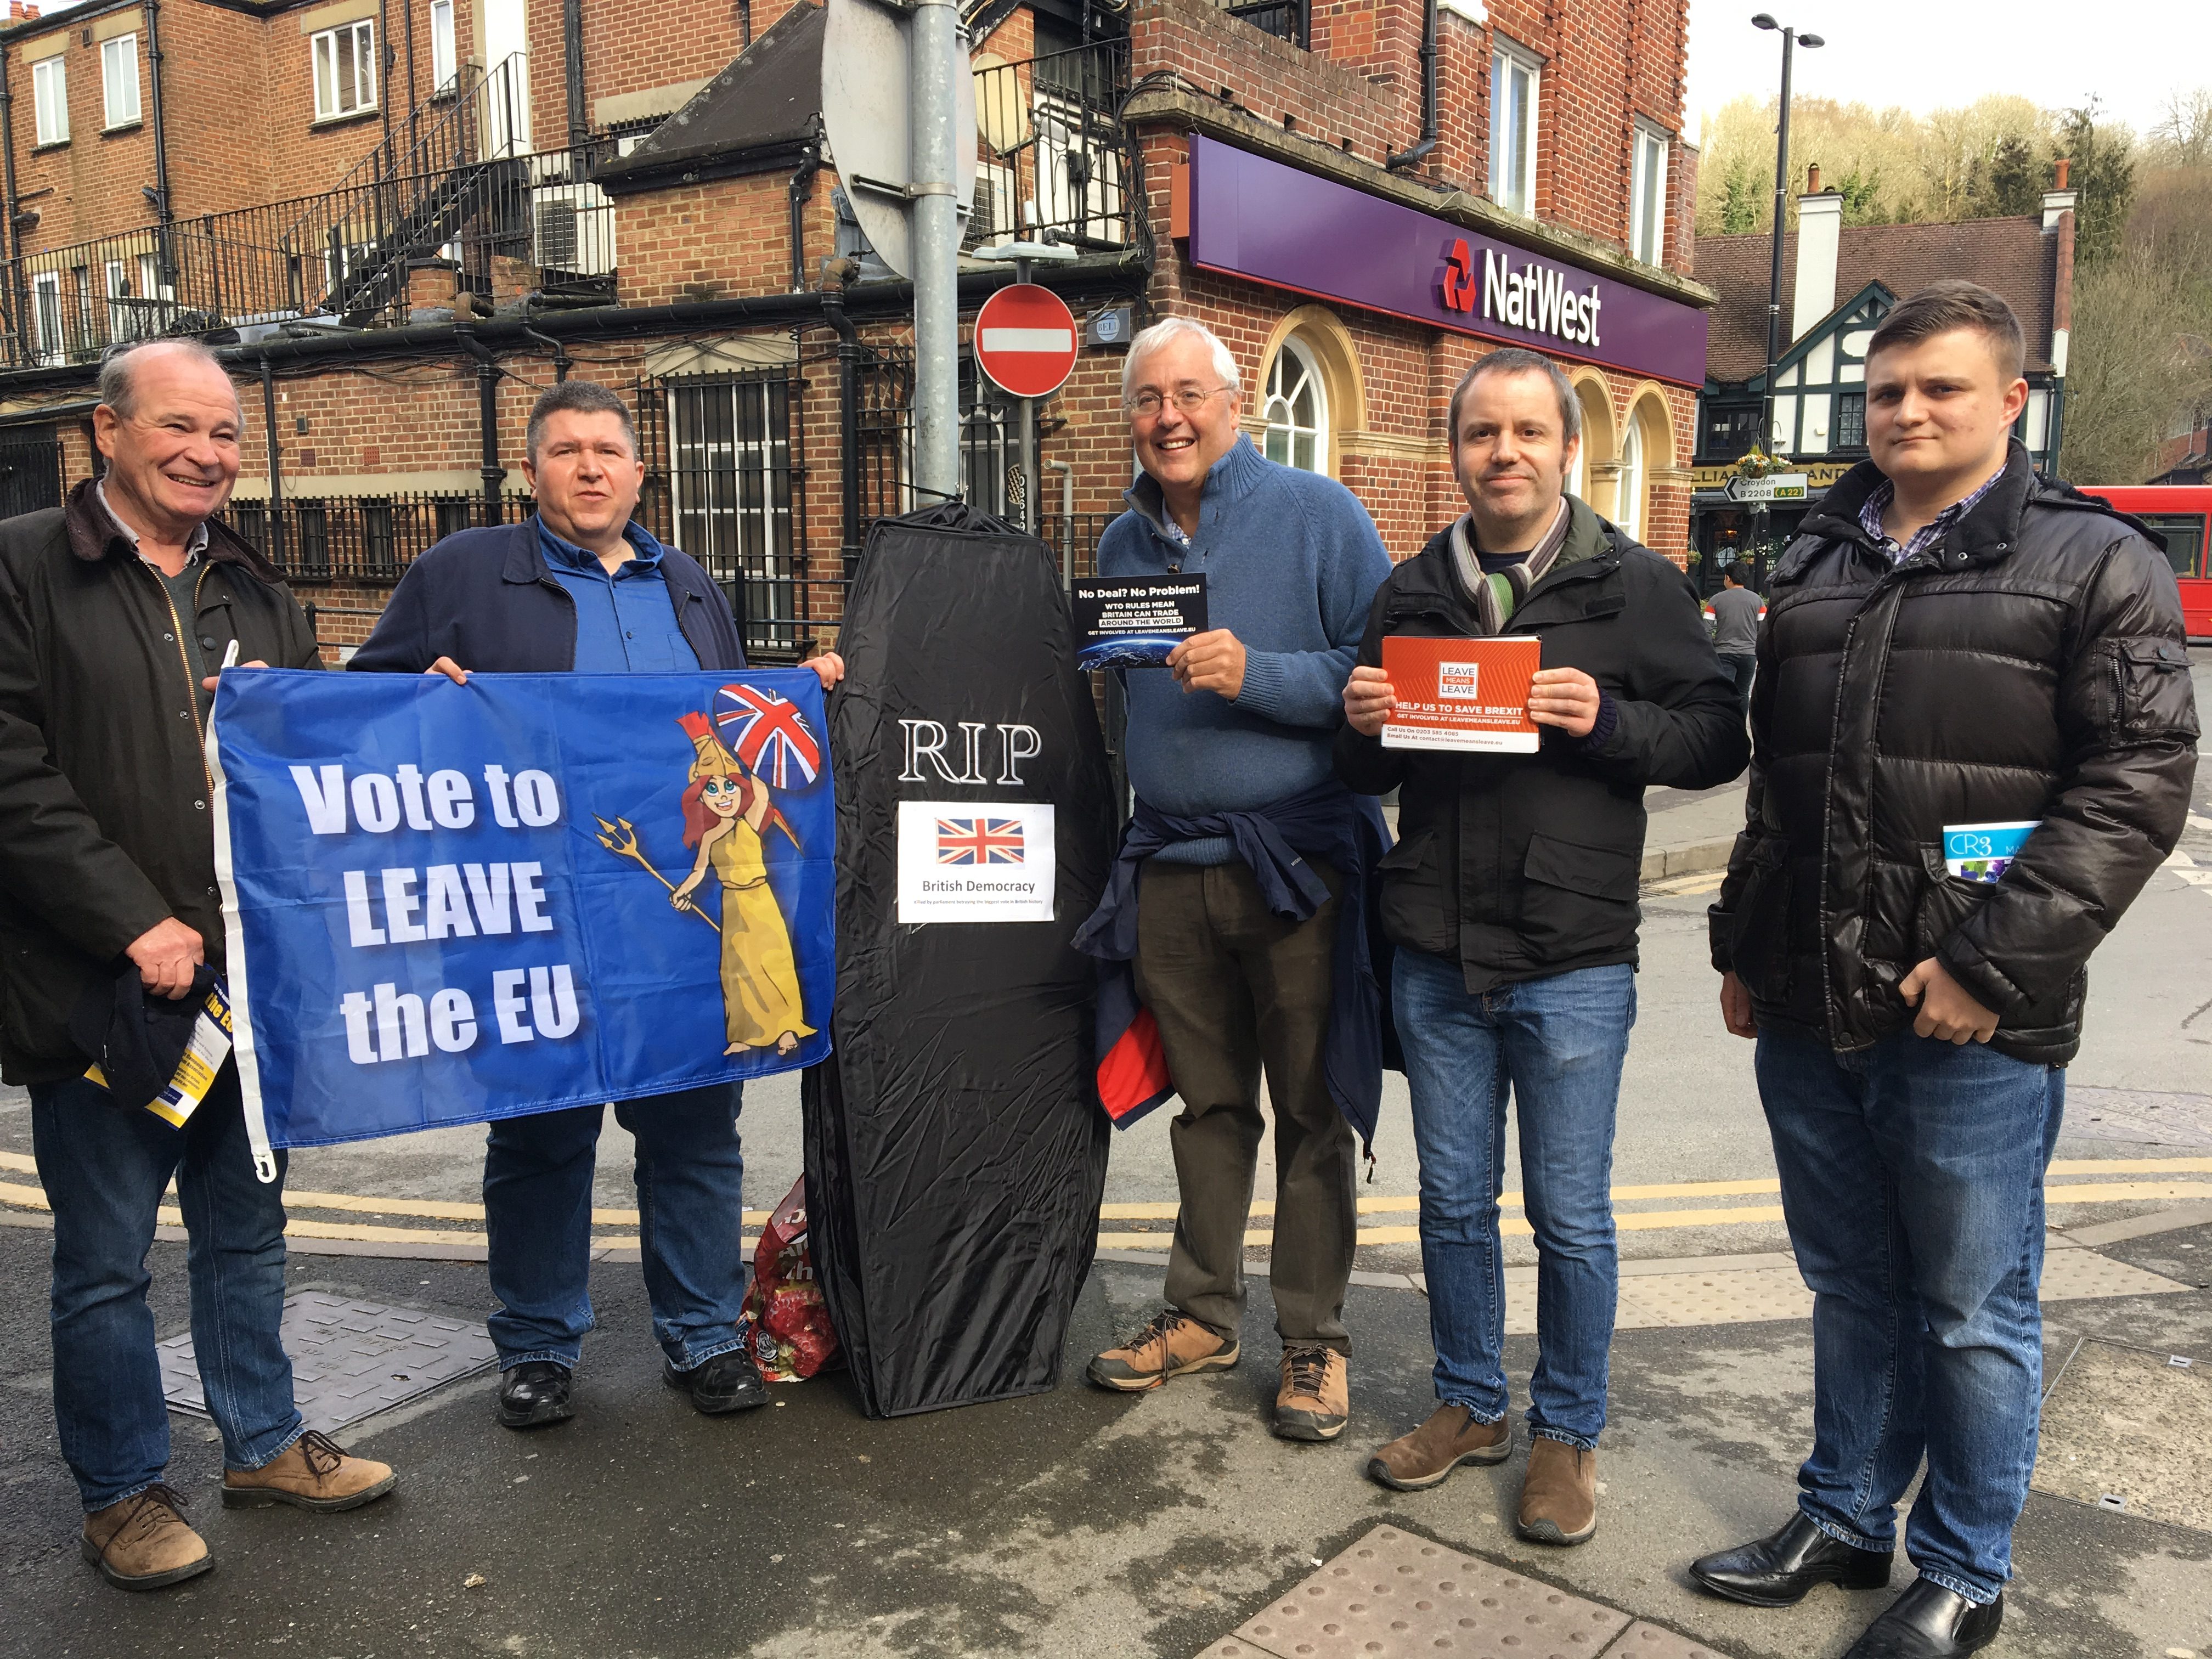 A great day in Caterham – Putting pressure on Sam Gyimah MP